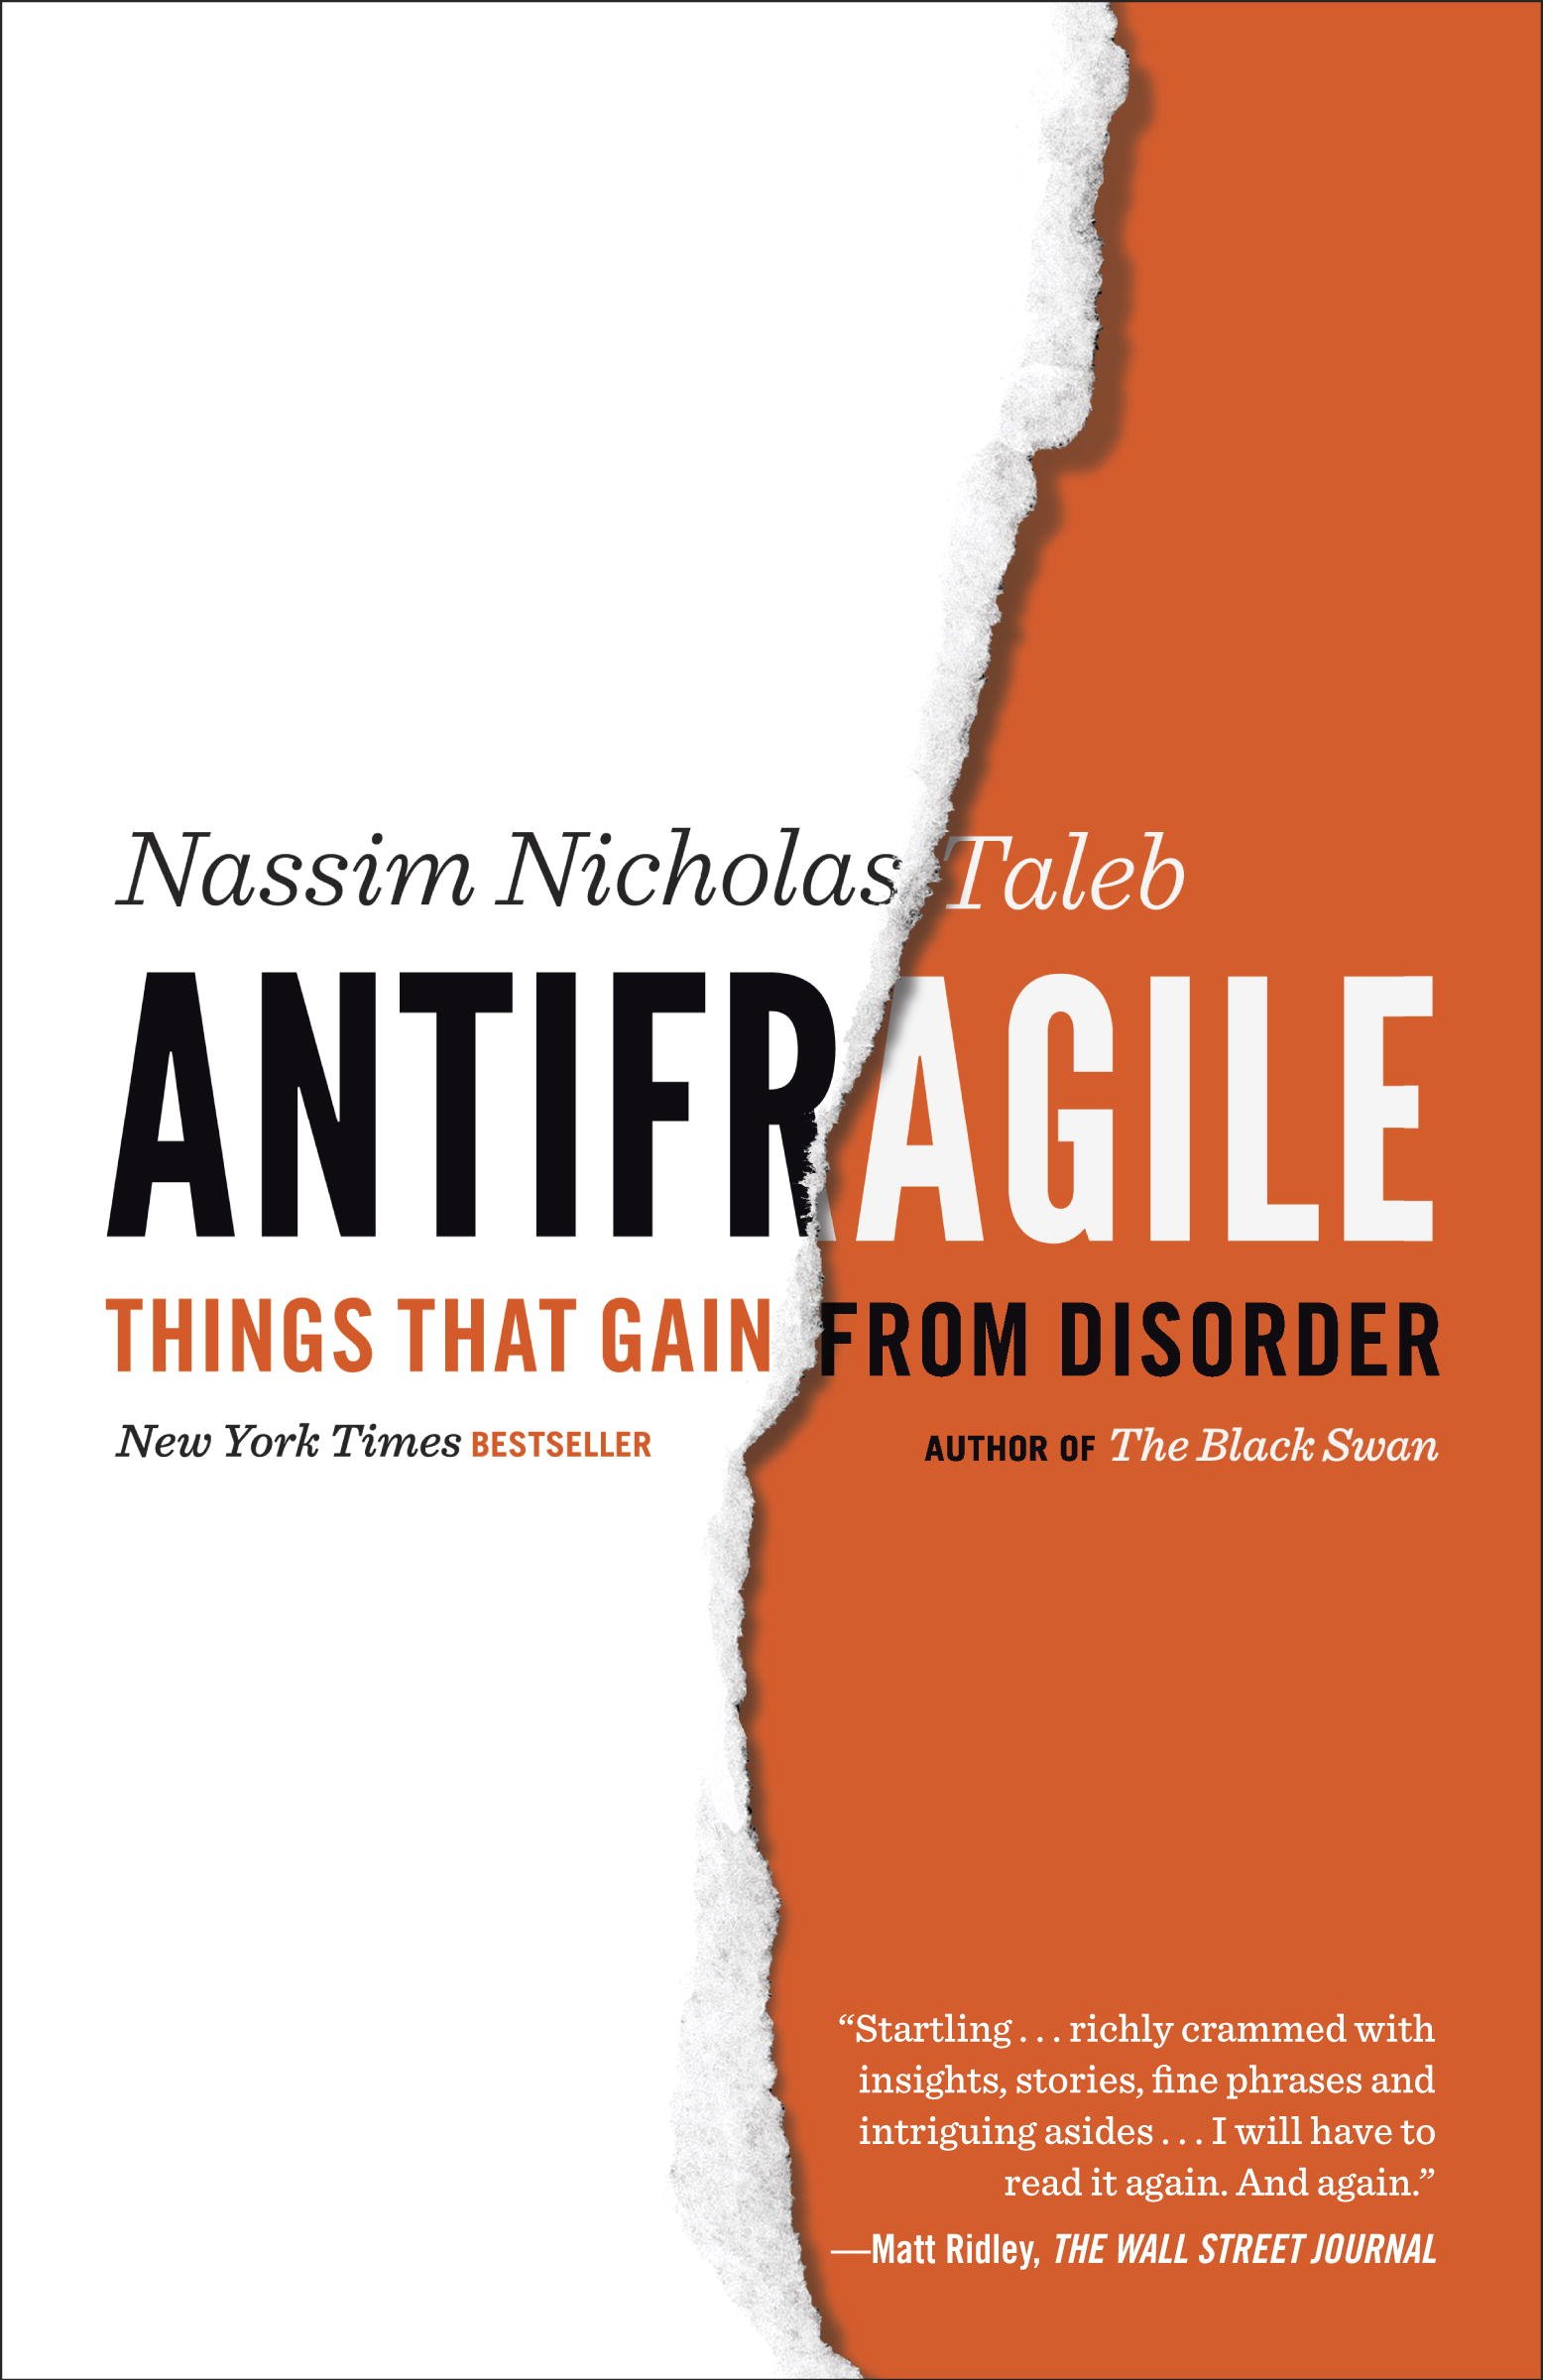 Antifragile: Things That Gain from Disorder (Incerto Book 3) (eBook) by Nassim Nicholas Taleb $1.99